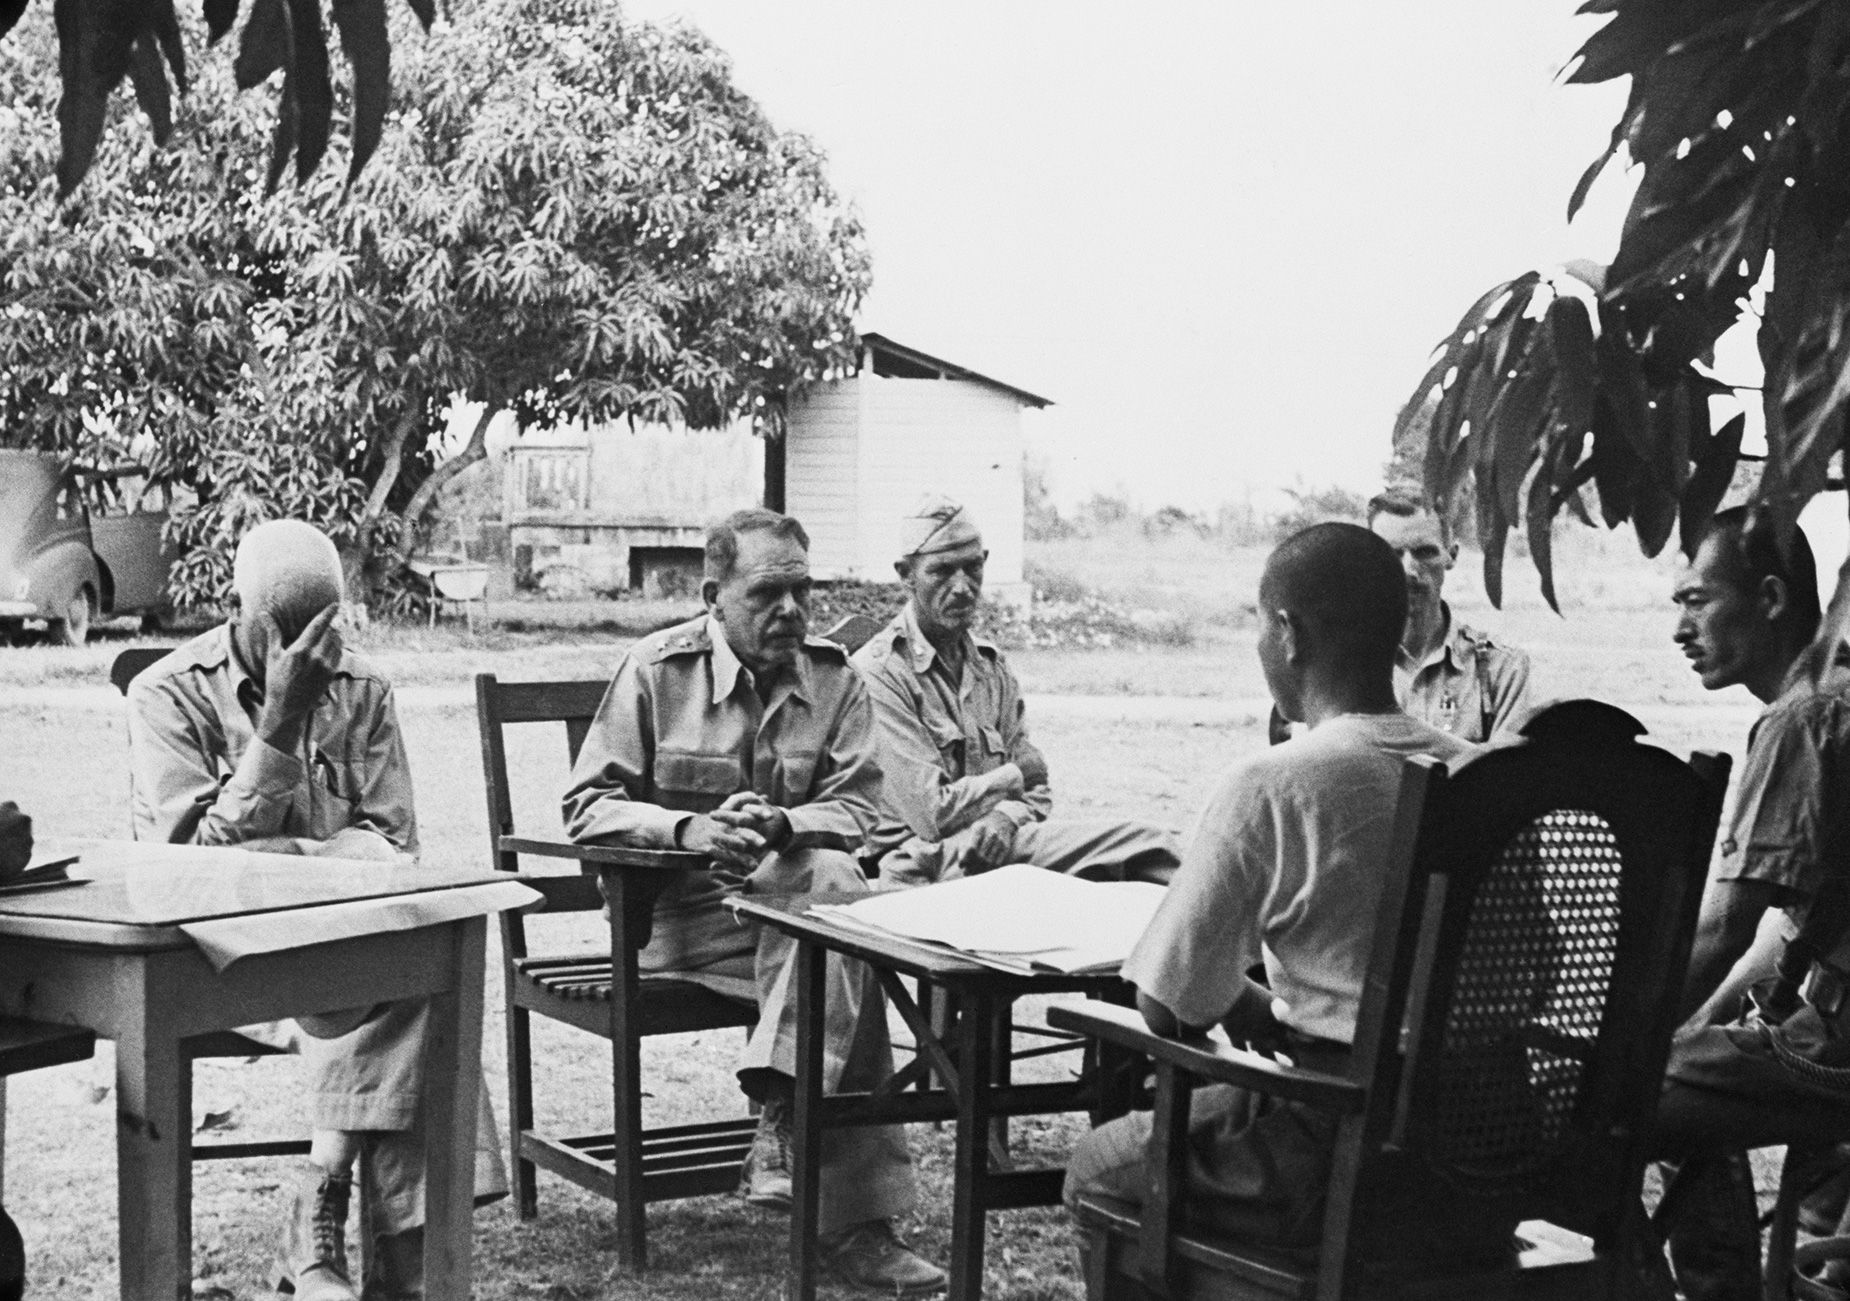 Maj. Gen. Edward P. King (second from left) discusses preliminary terms of surrender on Bataan with Japanese officers following battles along Bataan and Corregidor. Bettmann Archive/Getty Images